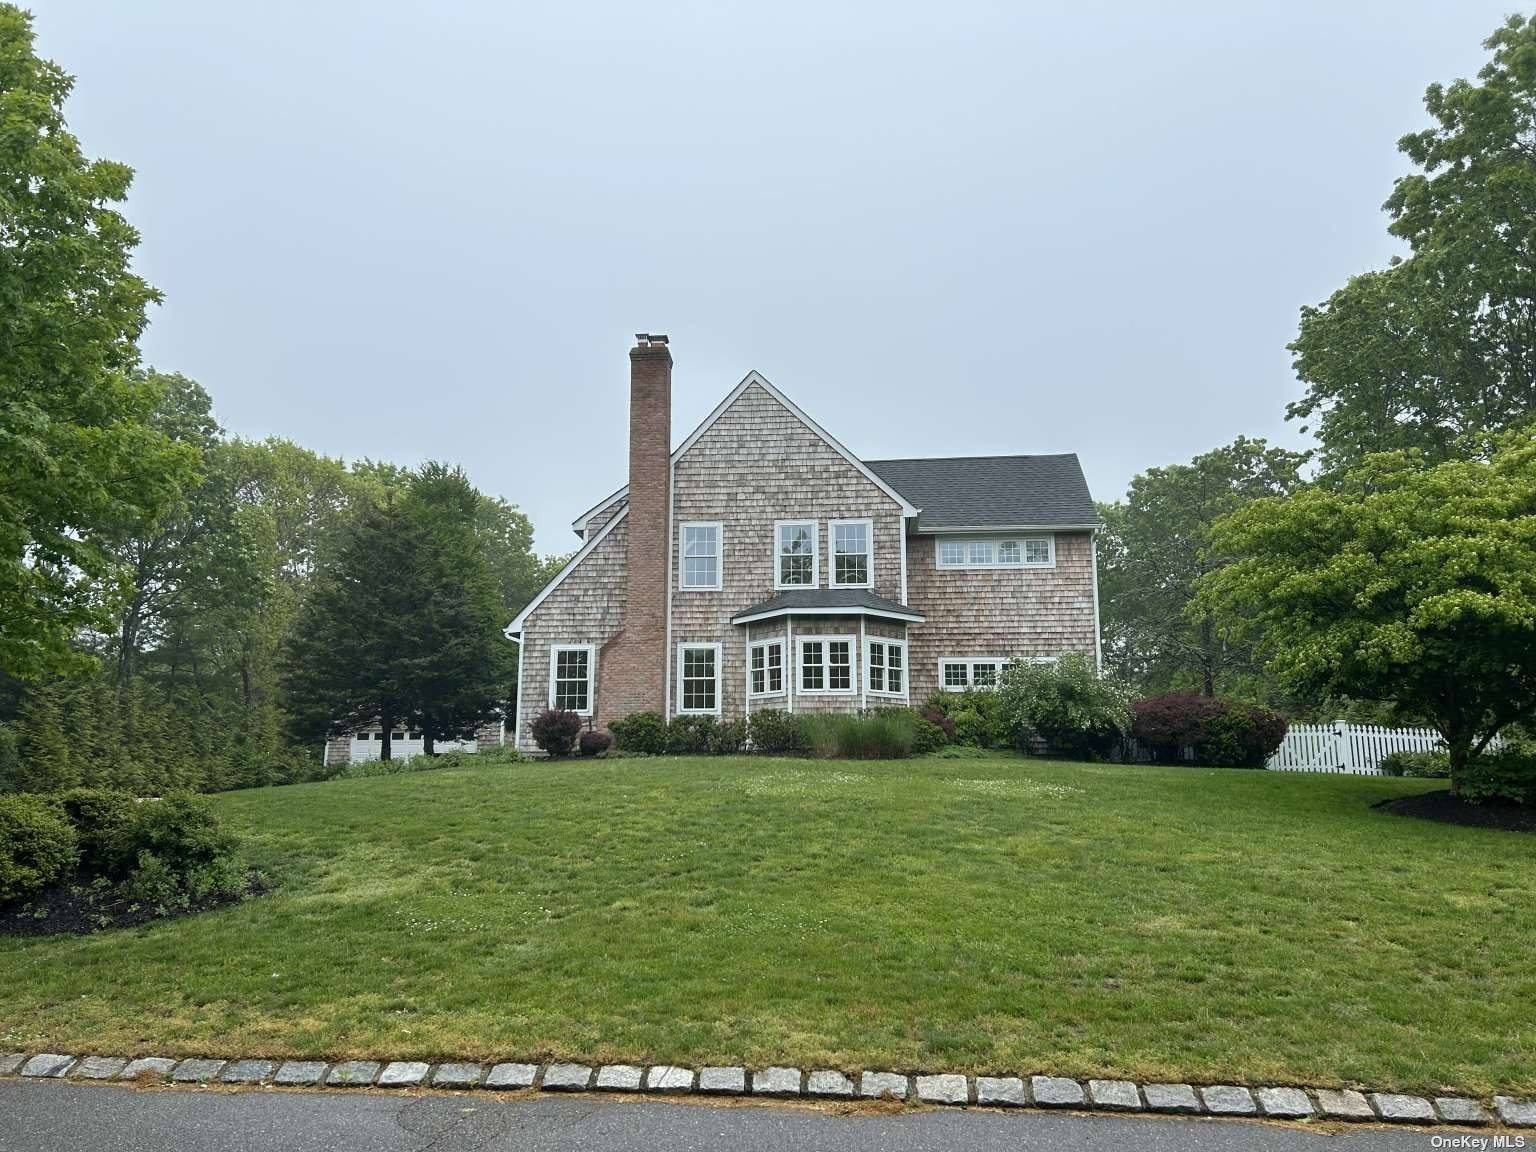 Southampton traditional turnkey sitting on a near 1 acre lot close to Southampton and Sag Harbor villages.